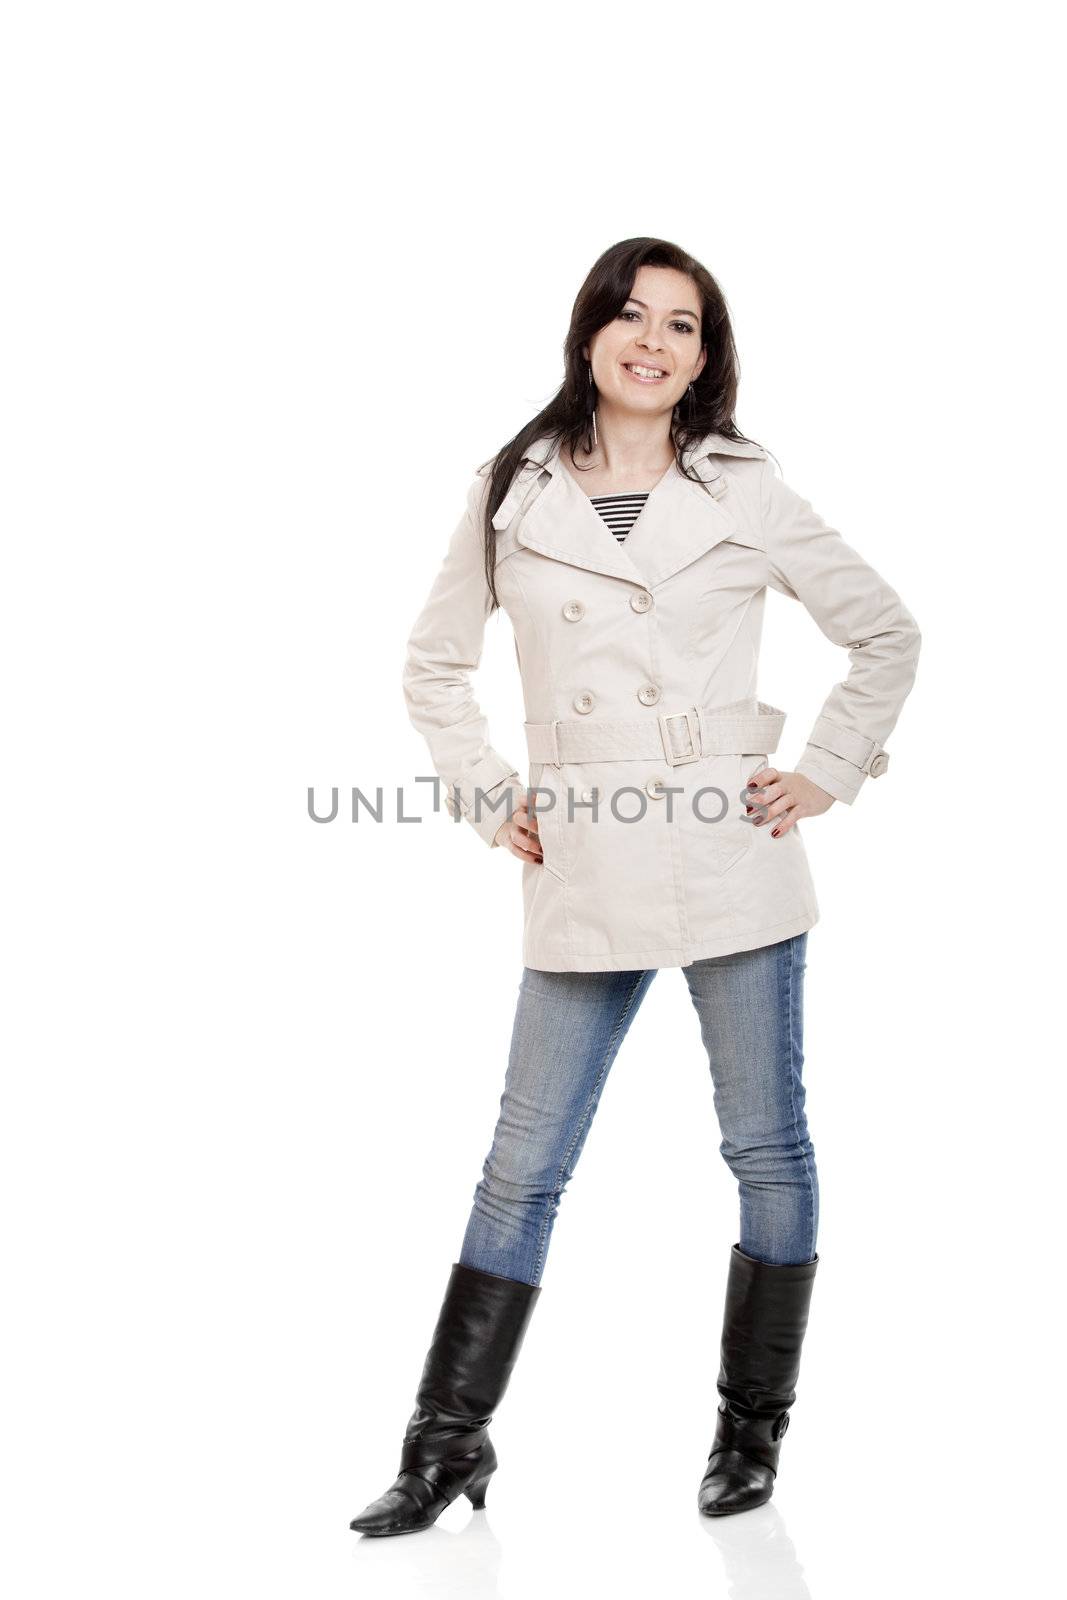 Modern young woman standing over a white background